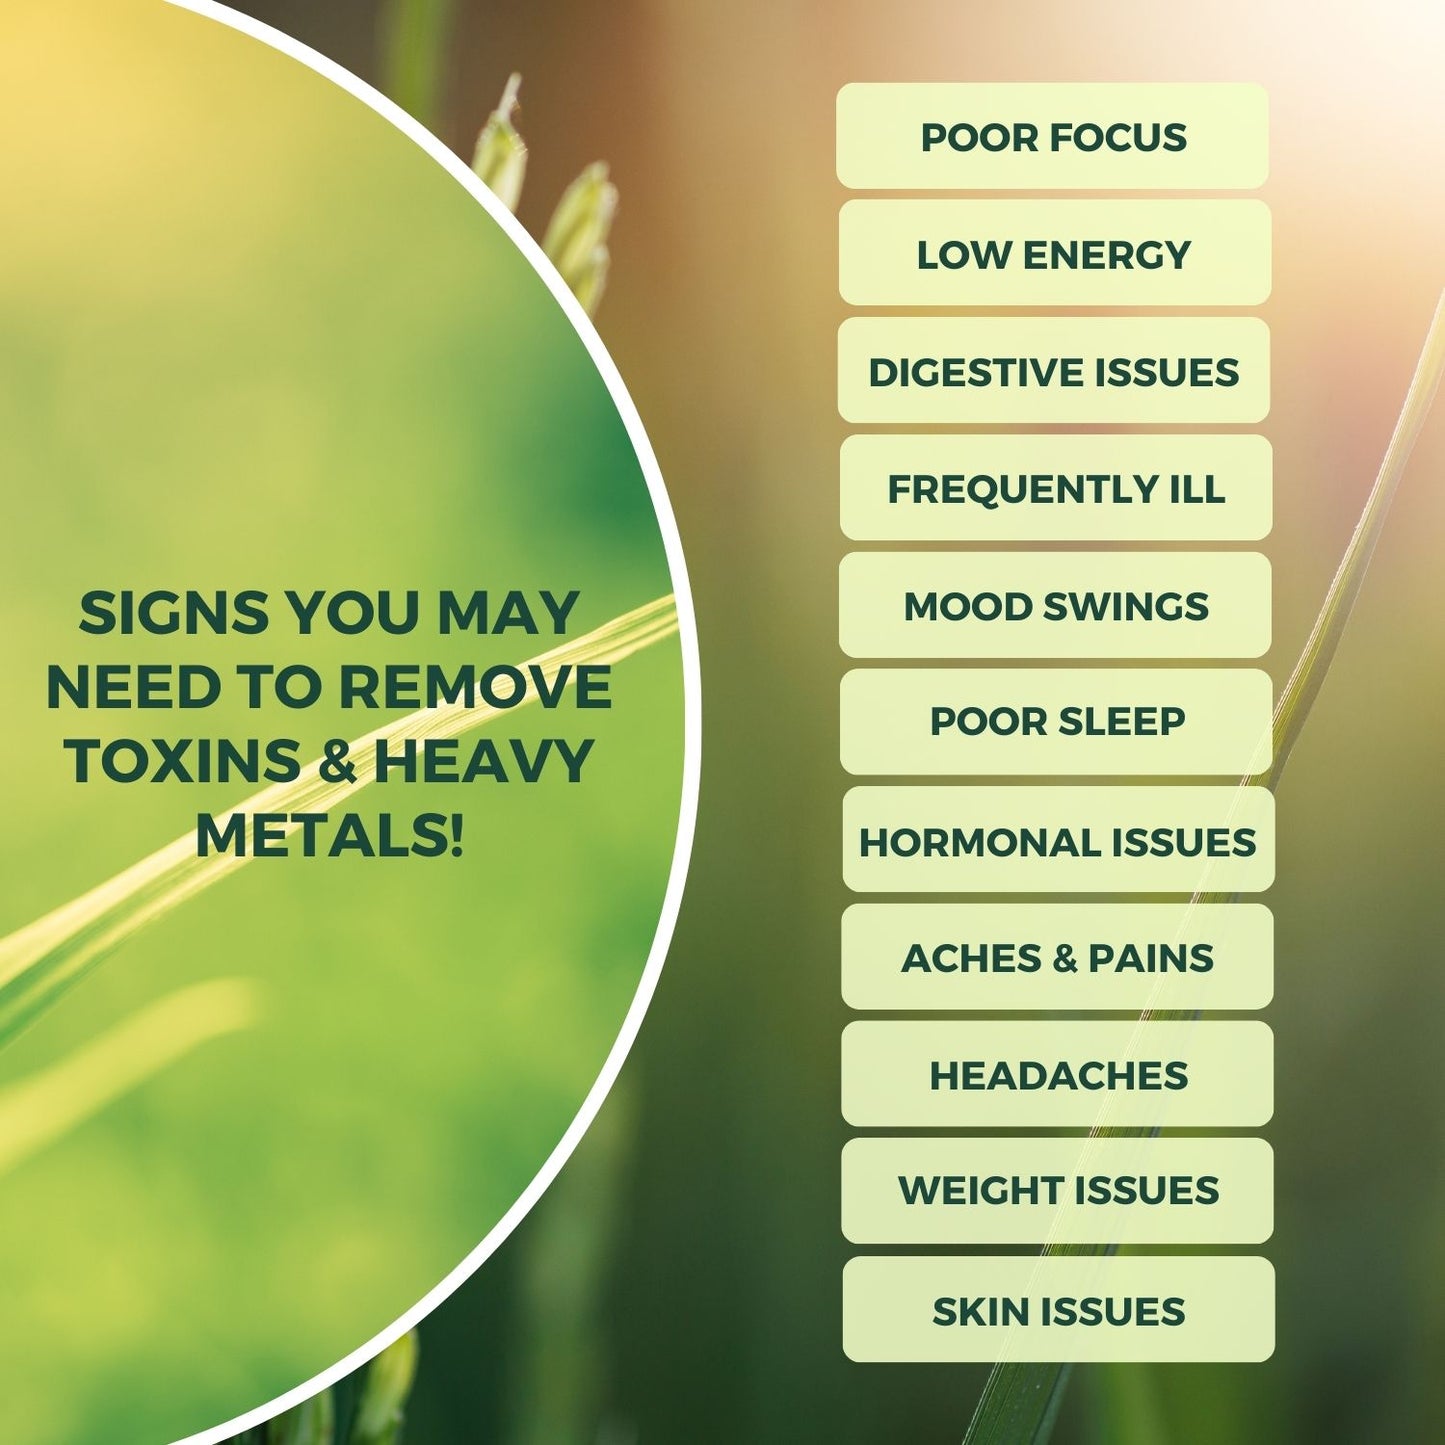 
                  
                    The image features an infographic titled "Signs You May Need to Remove Toxins & Heavy Metals!" set against a blurred natural green background. It lists several health issues that could potentially be addressed by detoxifying, such as poor focus, low energy, digestive issues, frequent illness, mood swings, poor sleep, hormonal imbalances, aches and pains, headaches, weight issues, and skin issues. 
                  
                